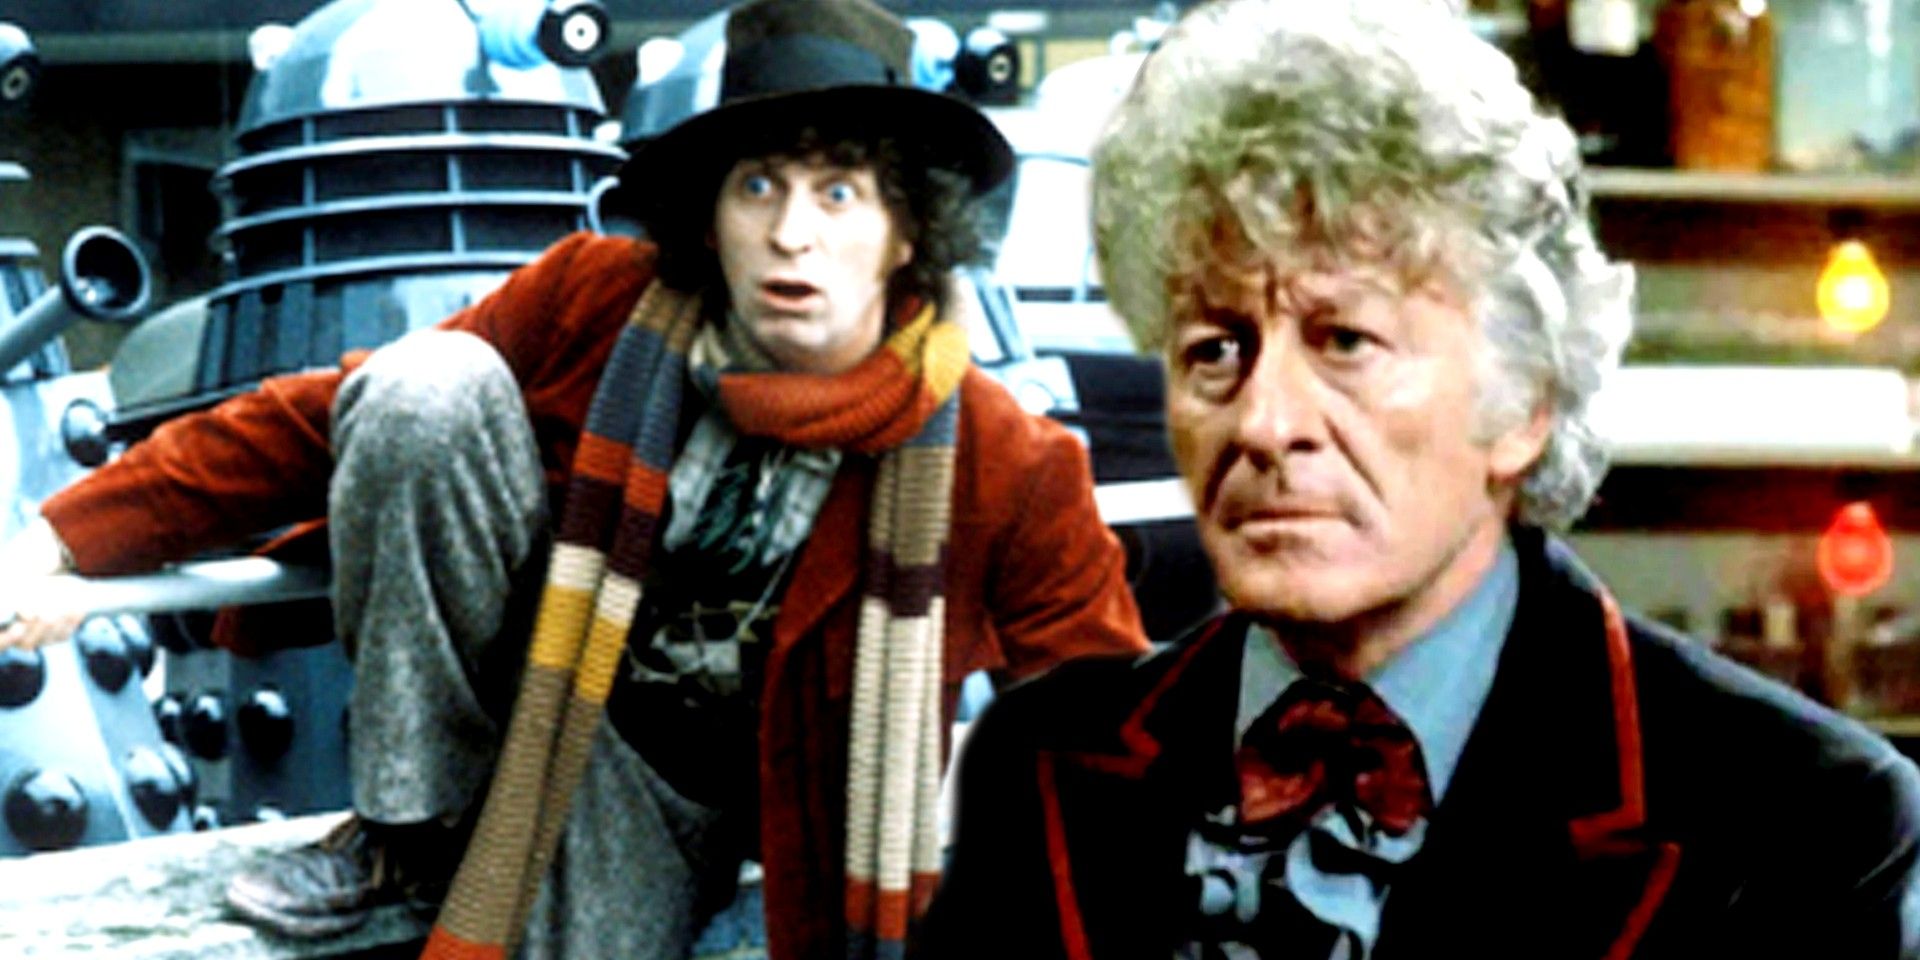 Blended image of the Third and Fourth Doctor from Doctor Who